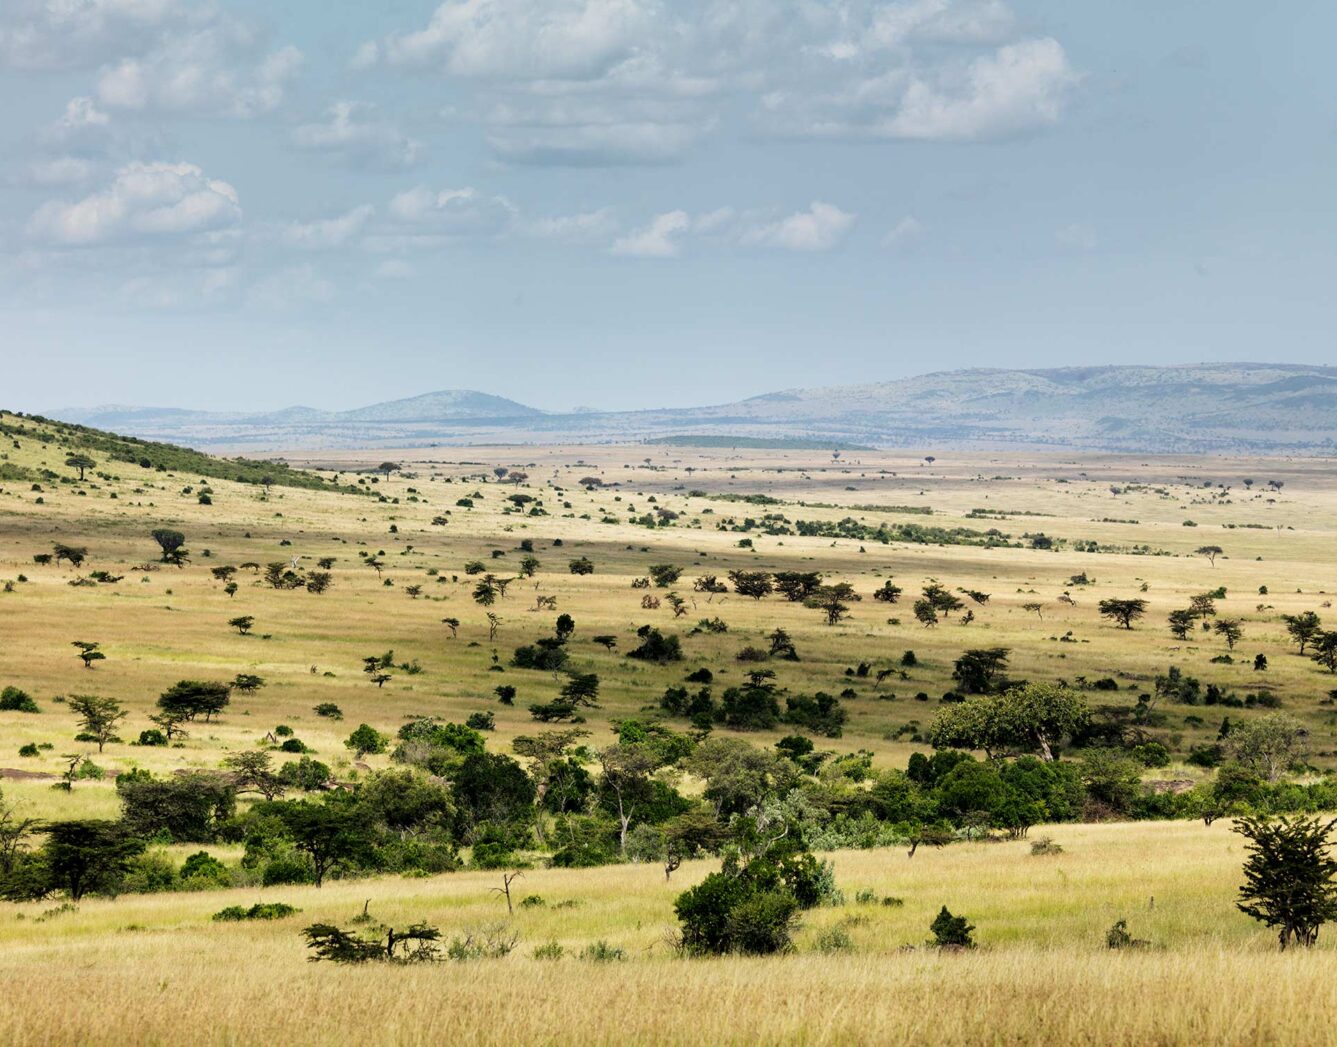 View of the Mara Conservancy